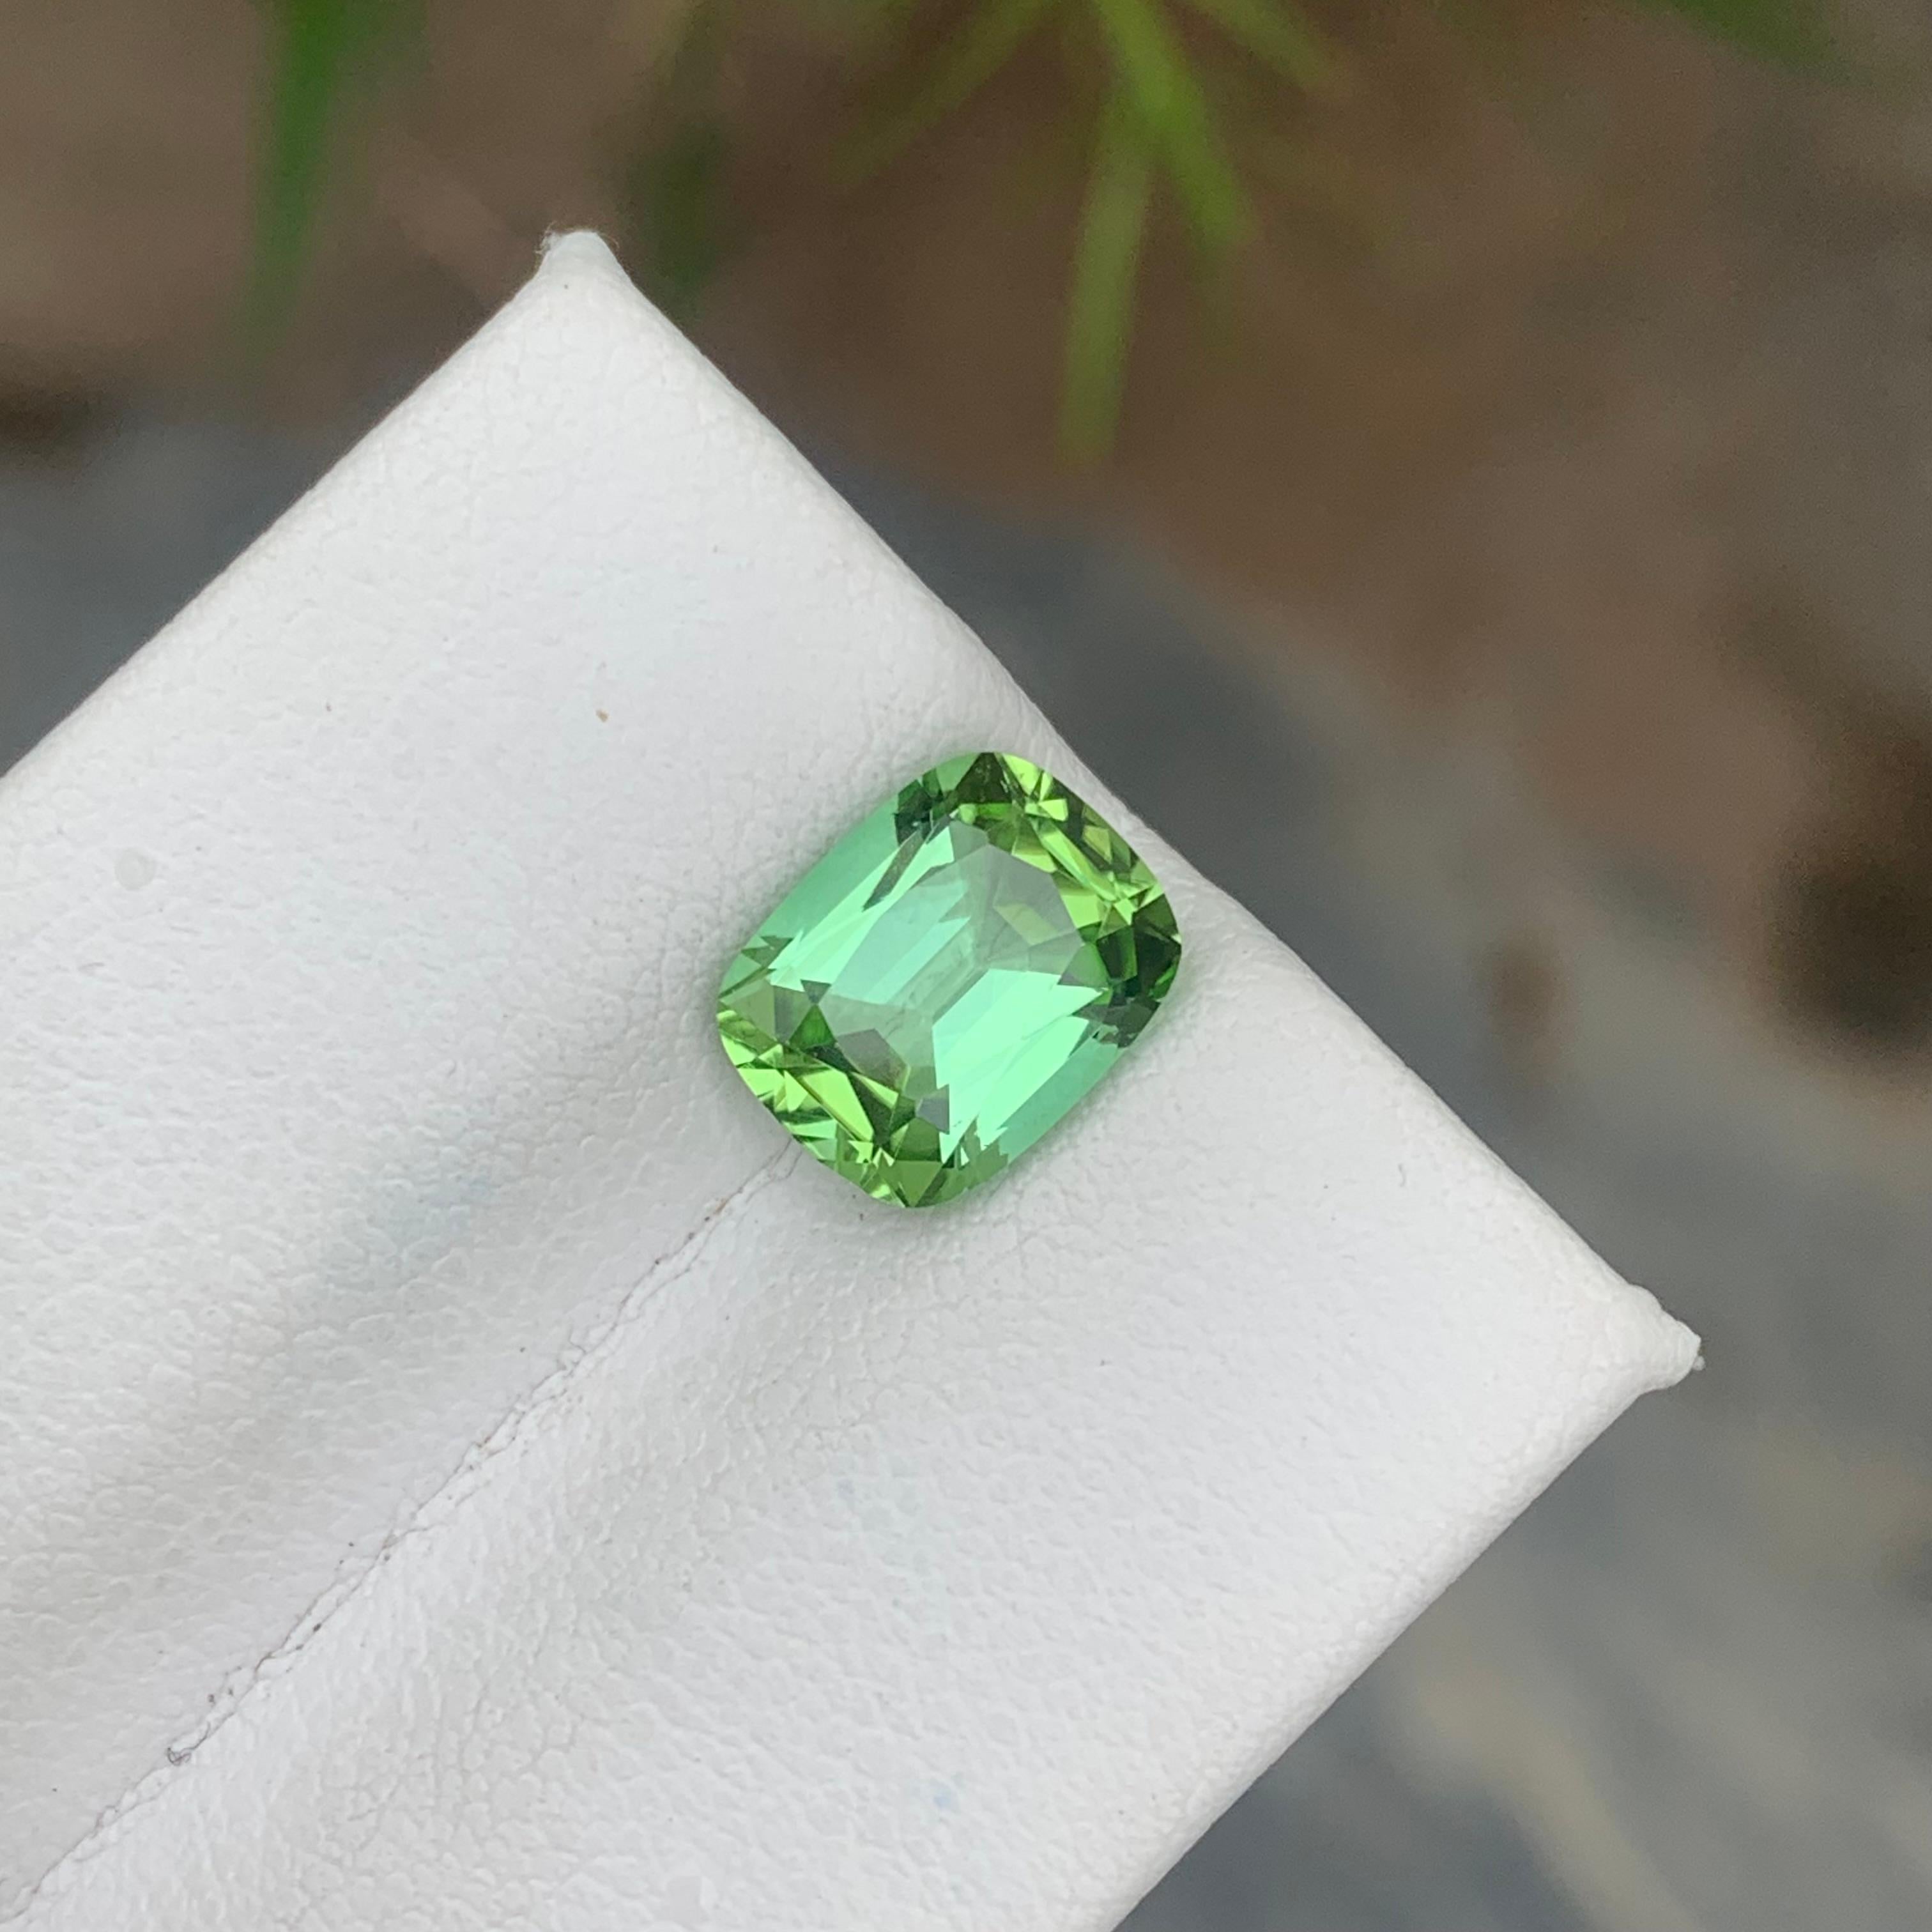 Stunning 2.65 Carat Natural Loose Tourmaline Ring Cushion Cut From Afghanistan For Sale 2